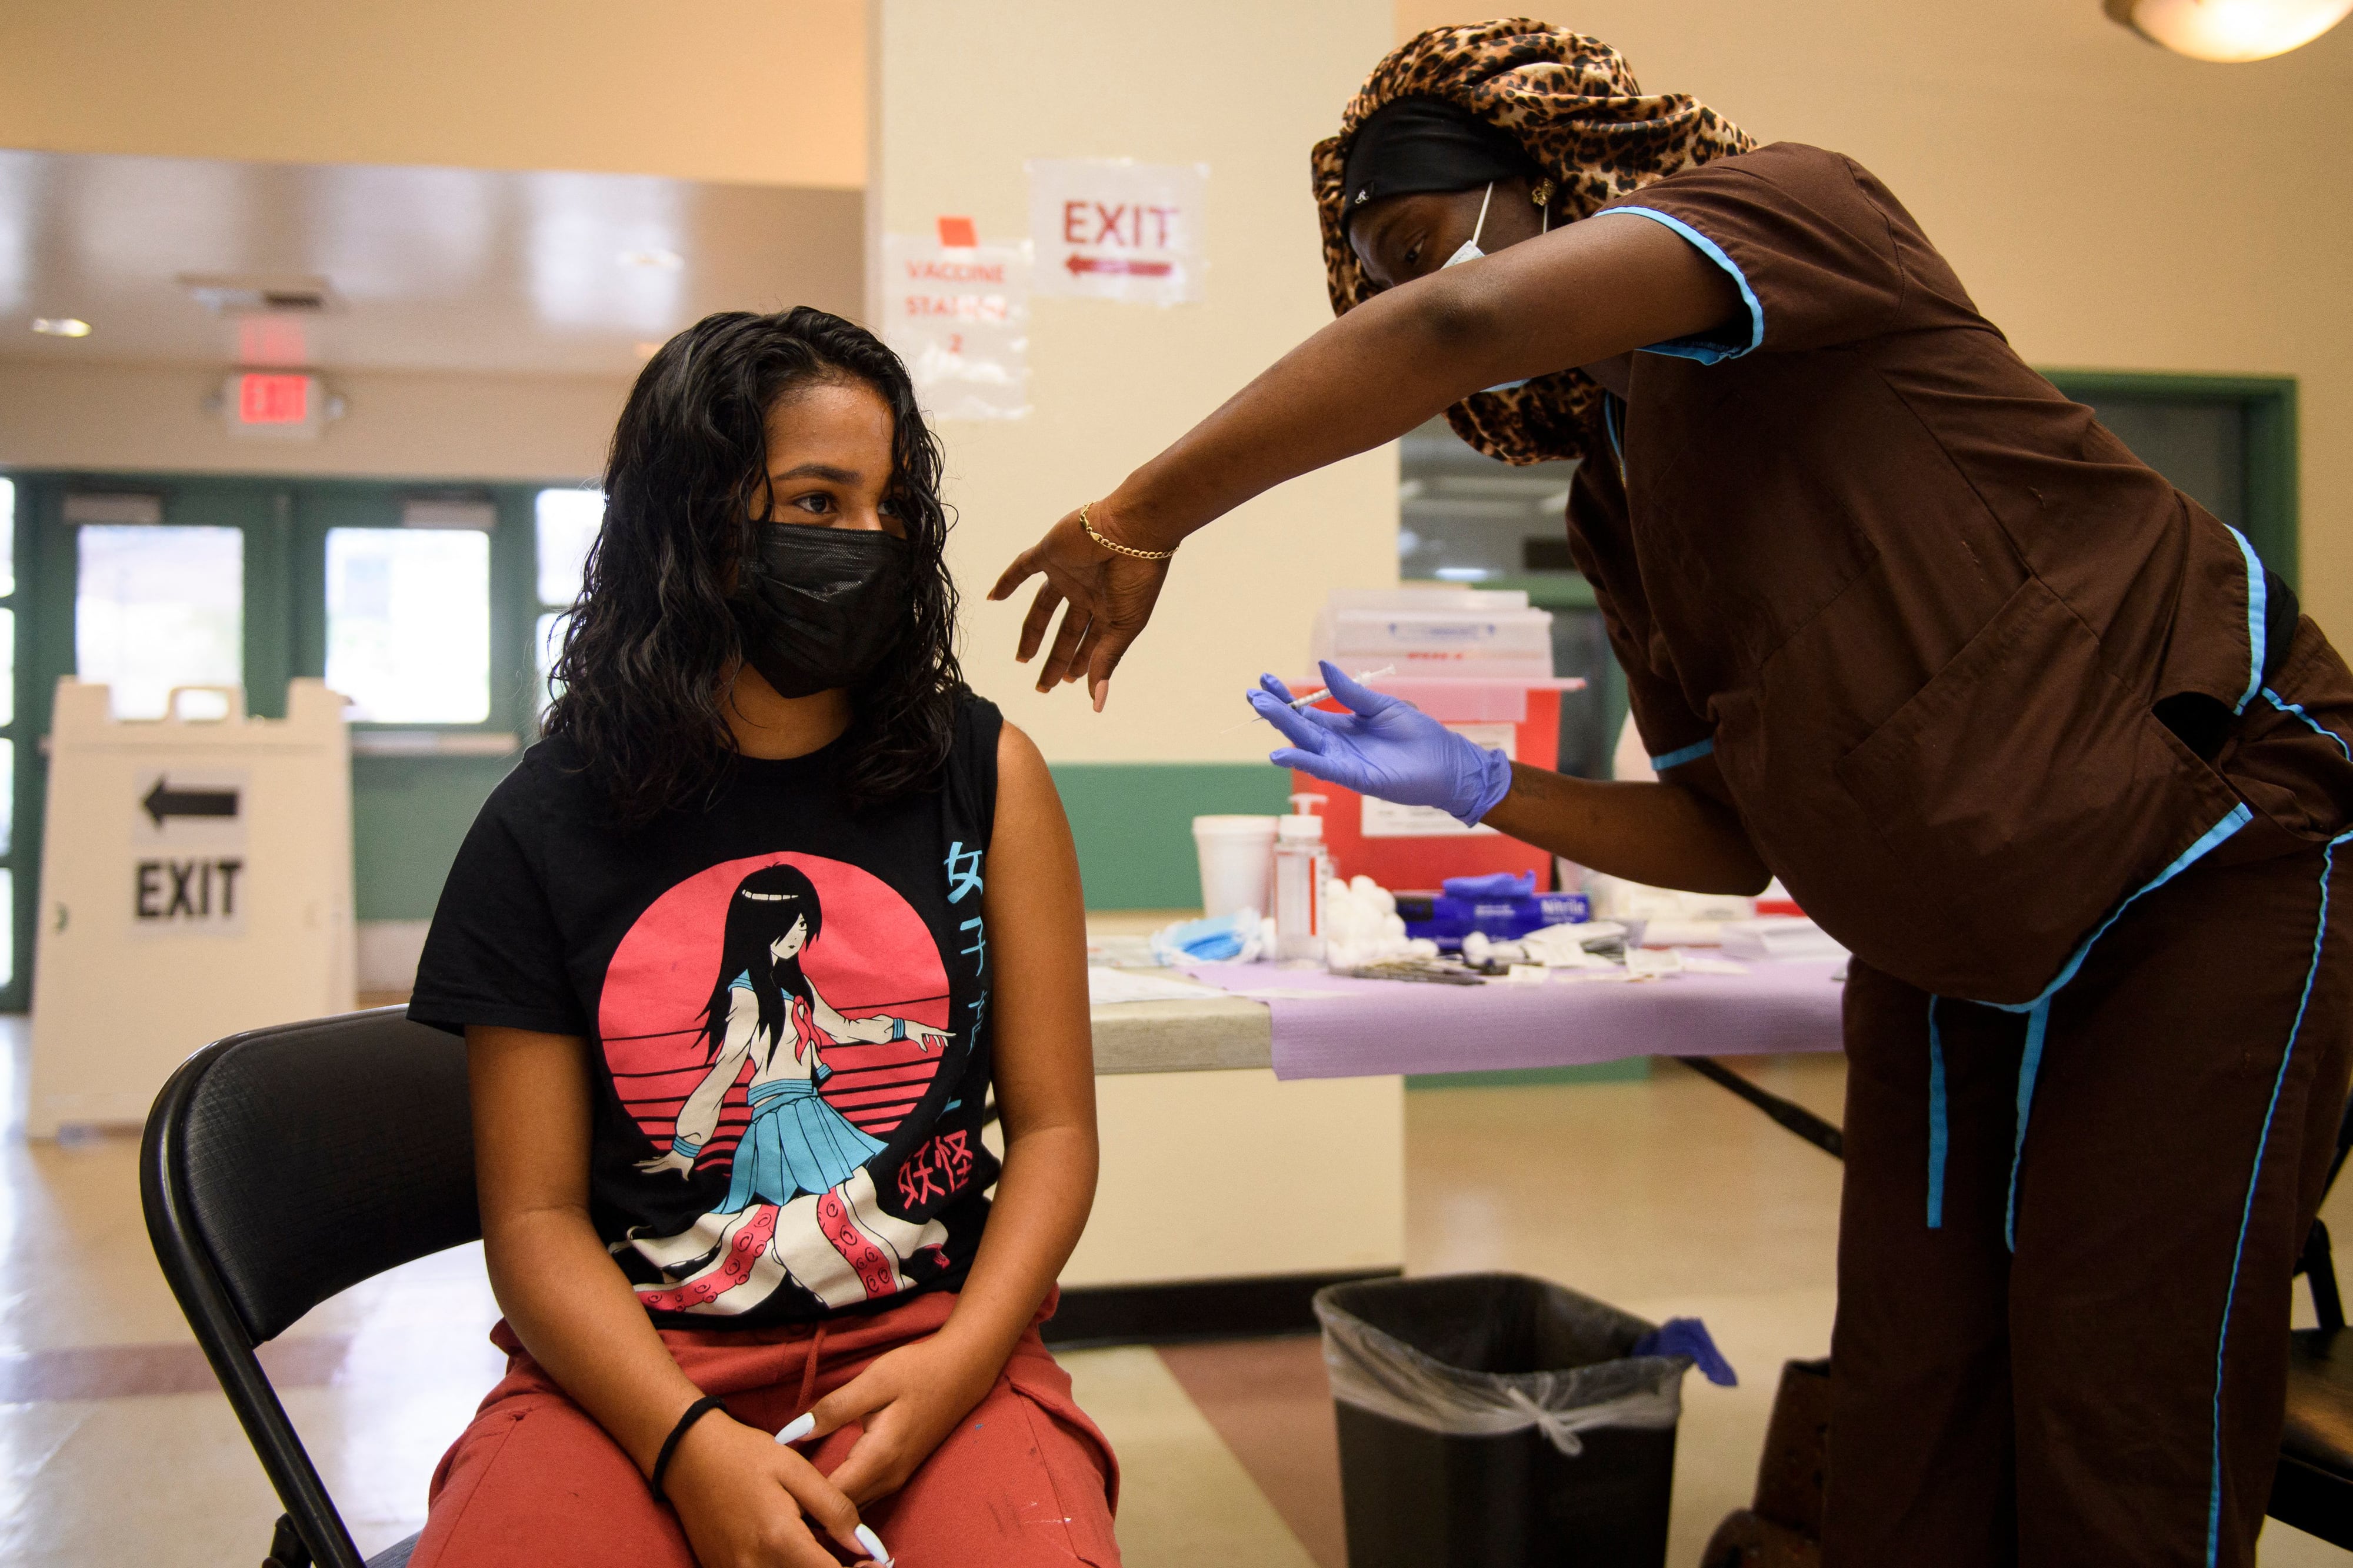 A young woman wearing a black and red japanese art-inspired shirt receives a dose of the COVID vaccine from a nurse.